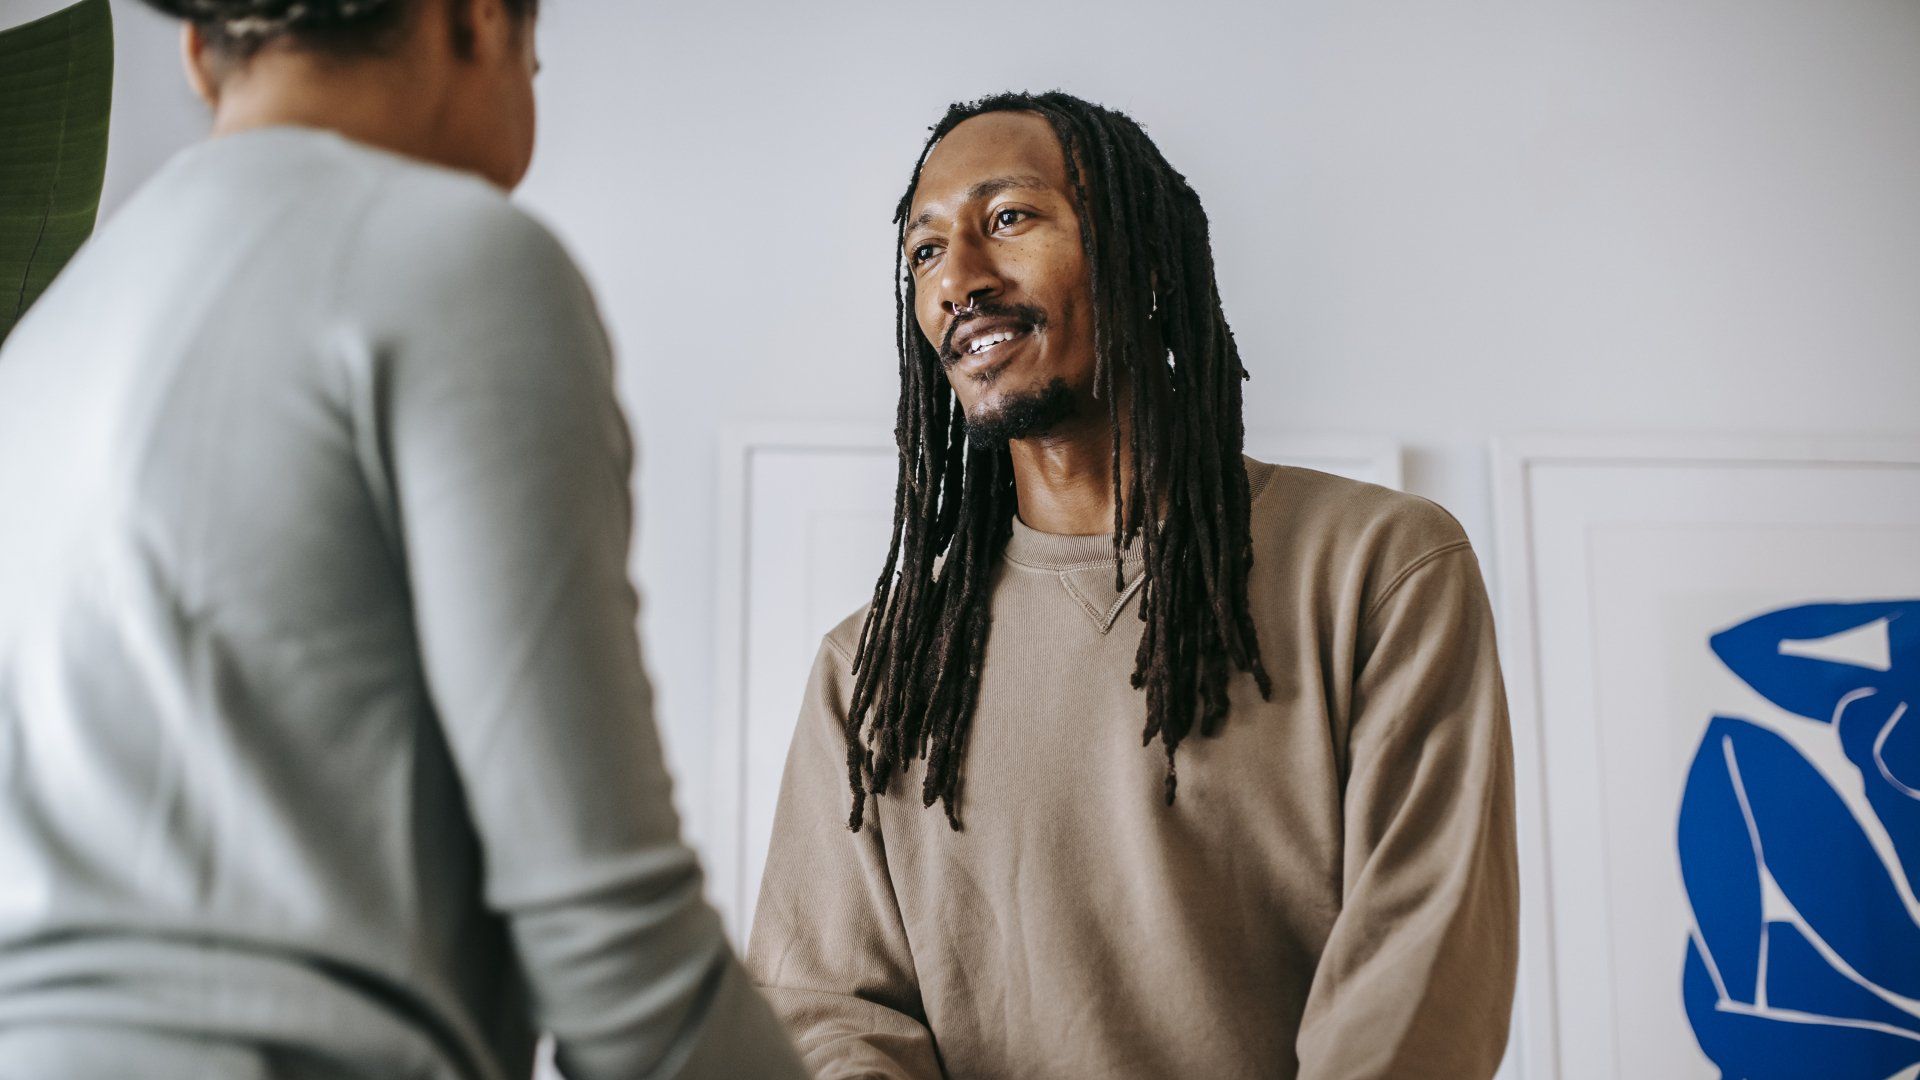 a man with dreadlocks is shaking hands with a woman .